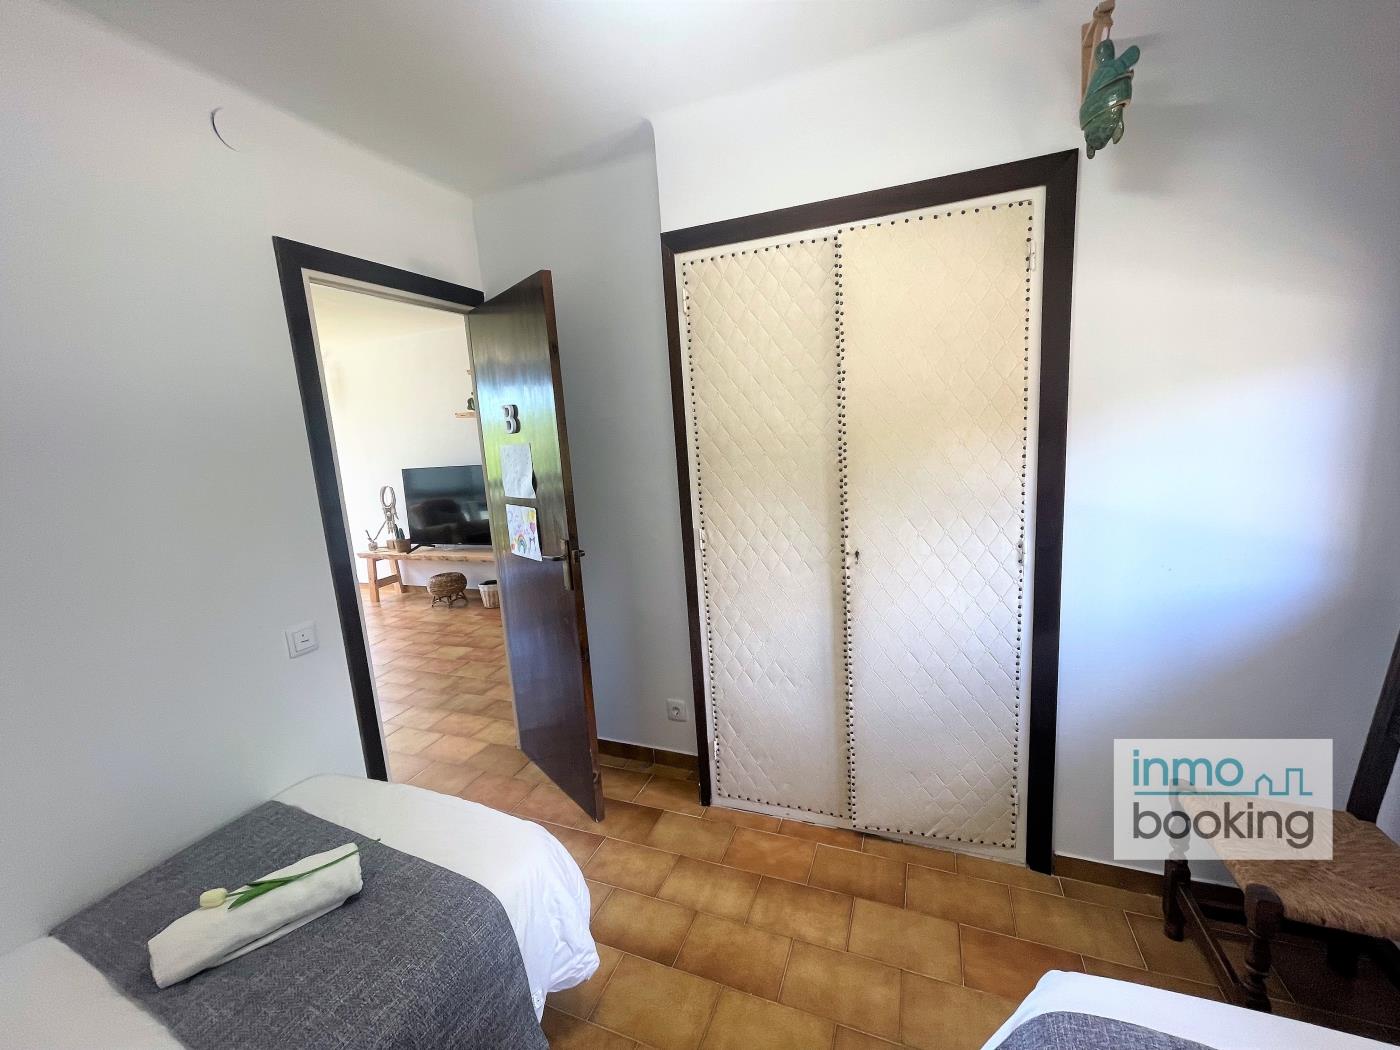 Namvan Vilafortuny, beach, air conditioning and wifi in cambrils